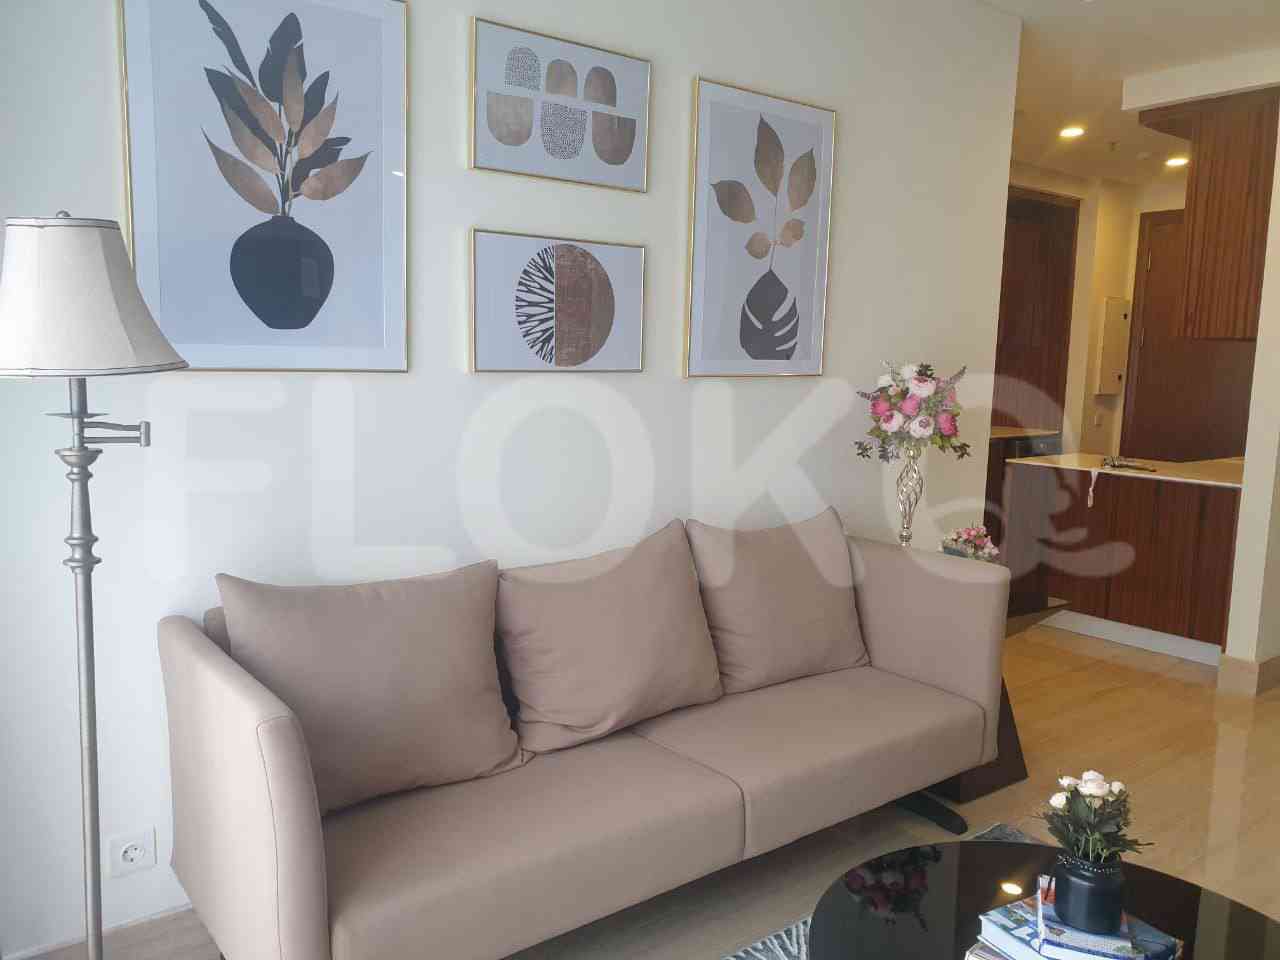 2 Bedroom on 36th Floor for Rent in South Hills Apartment - fku3f9 4